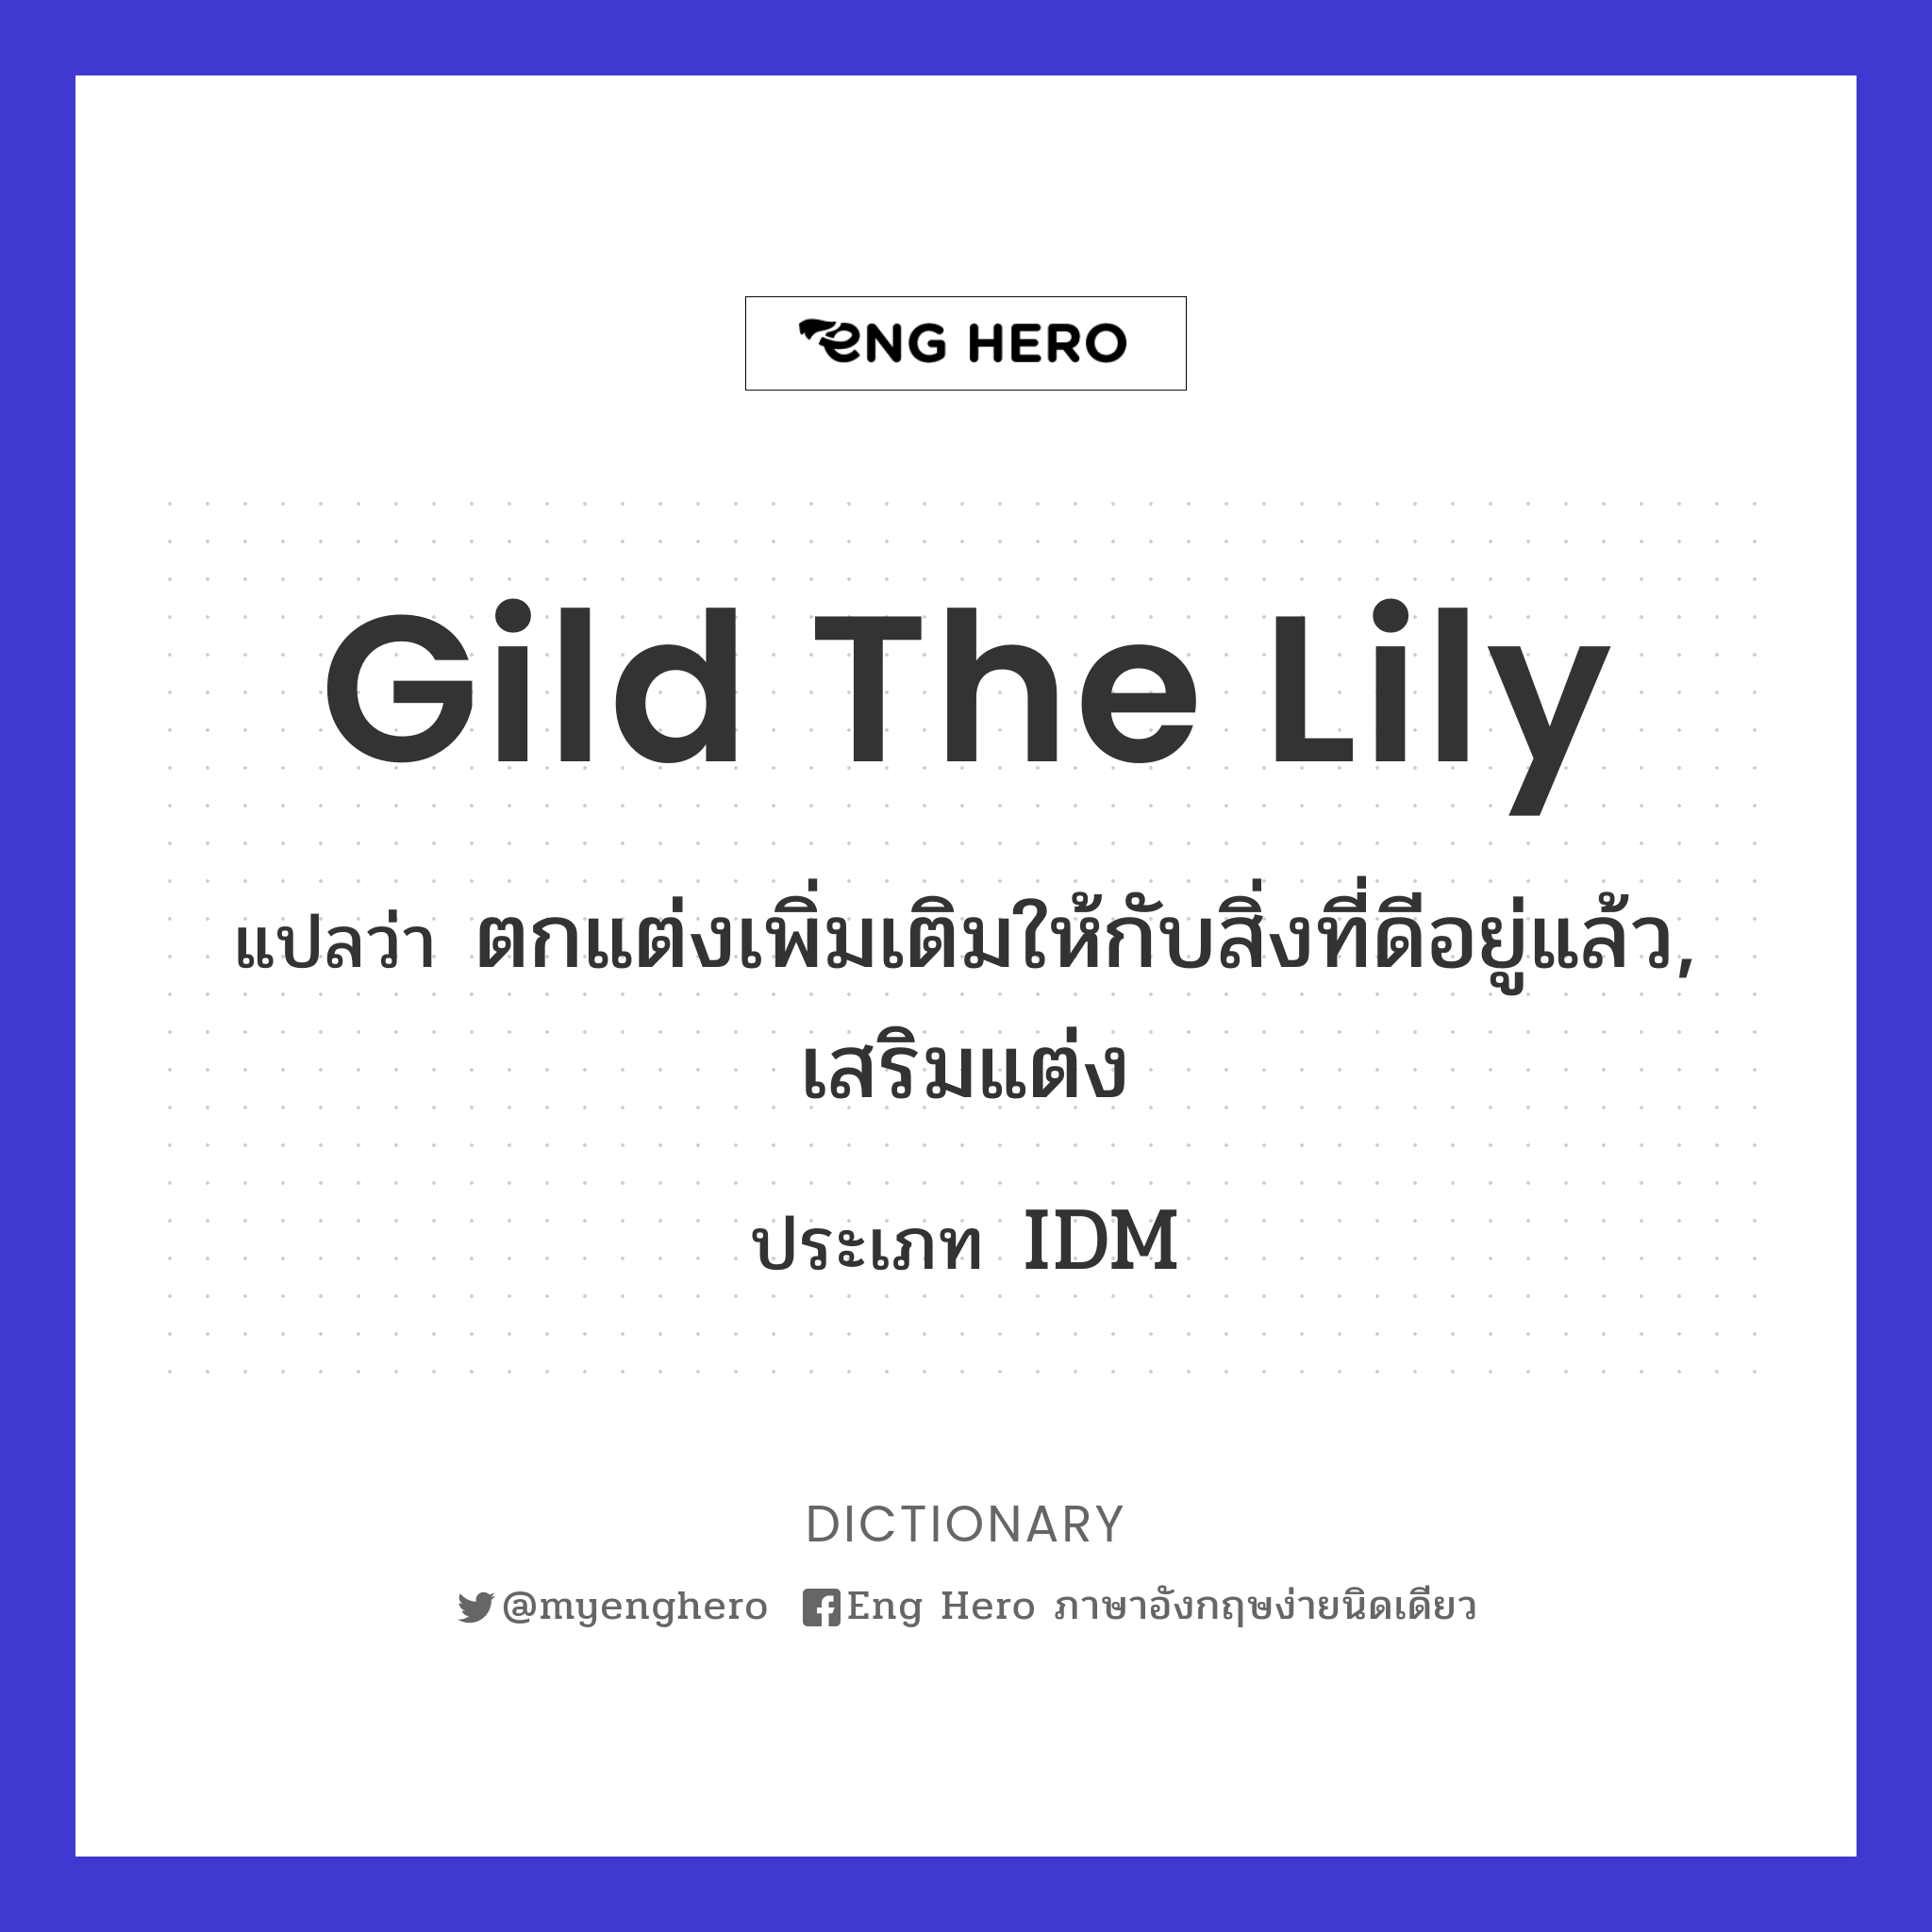 gild the lily